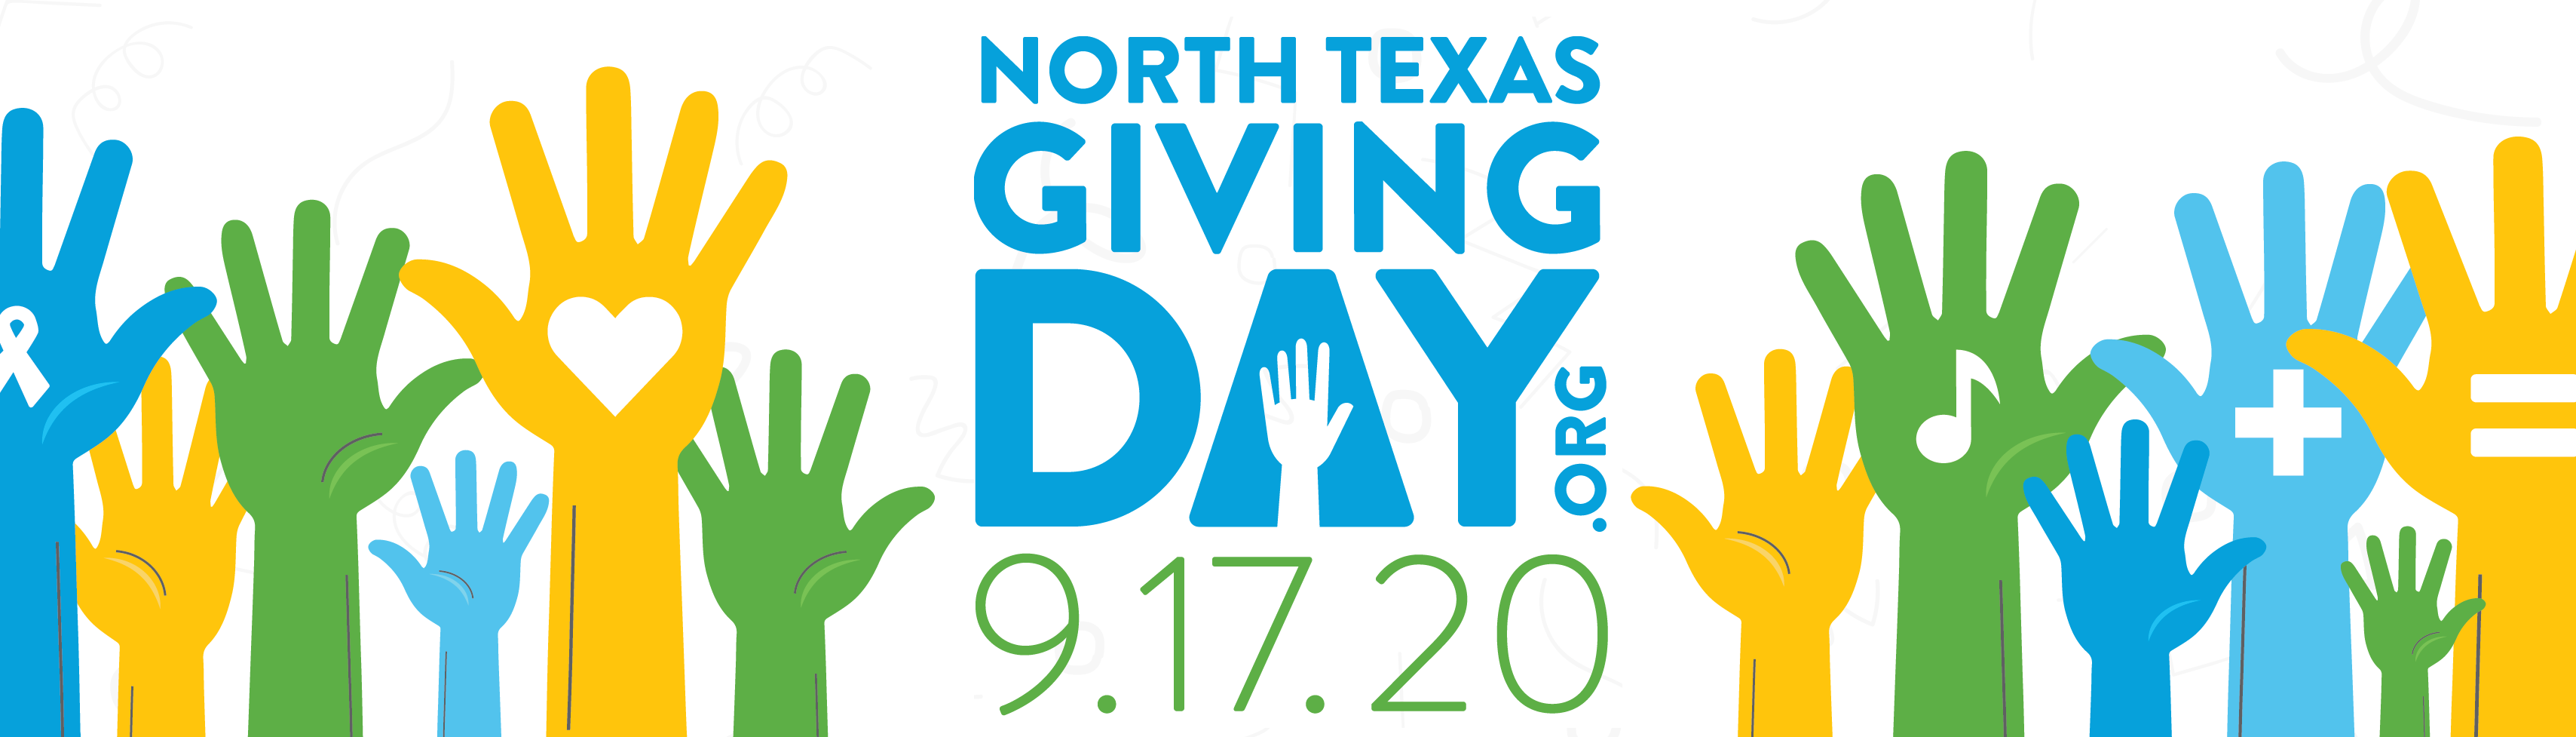 North Texas Giving Day Great Hearts Irving, Serving Grades K12